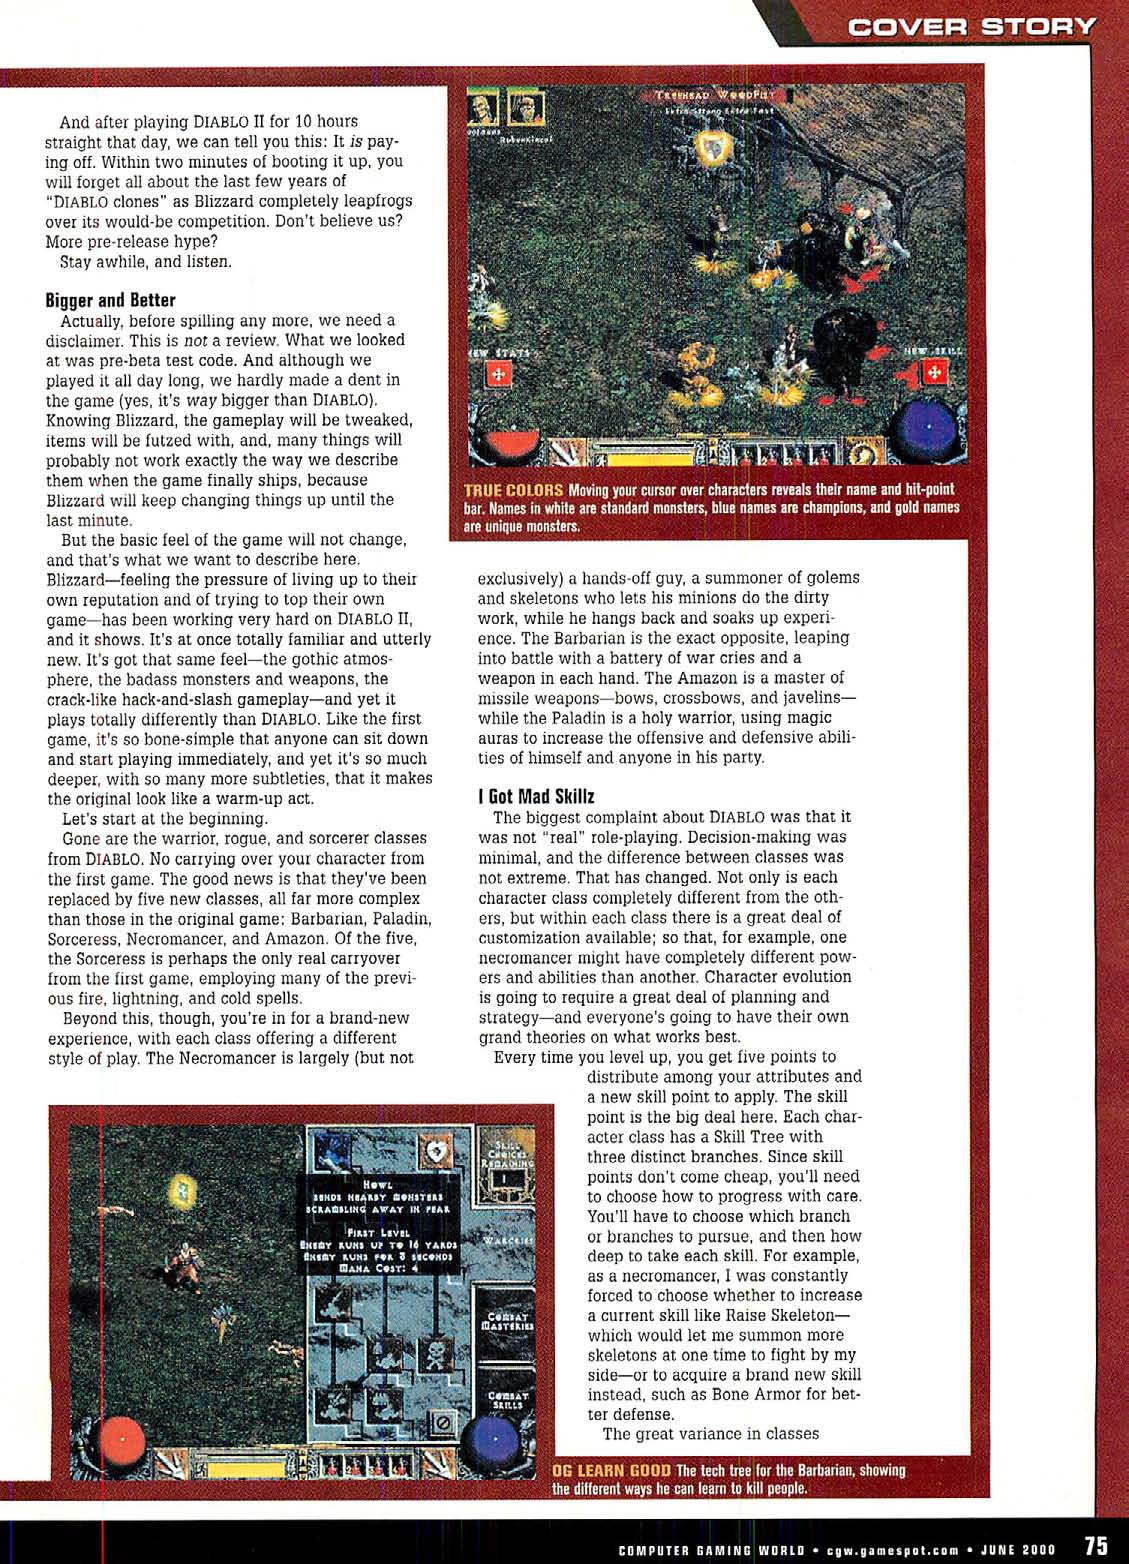 Computer Gaming World Diablo 2 preview